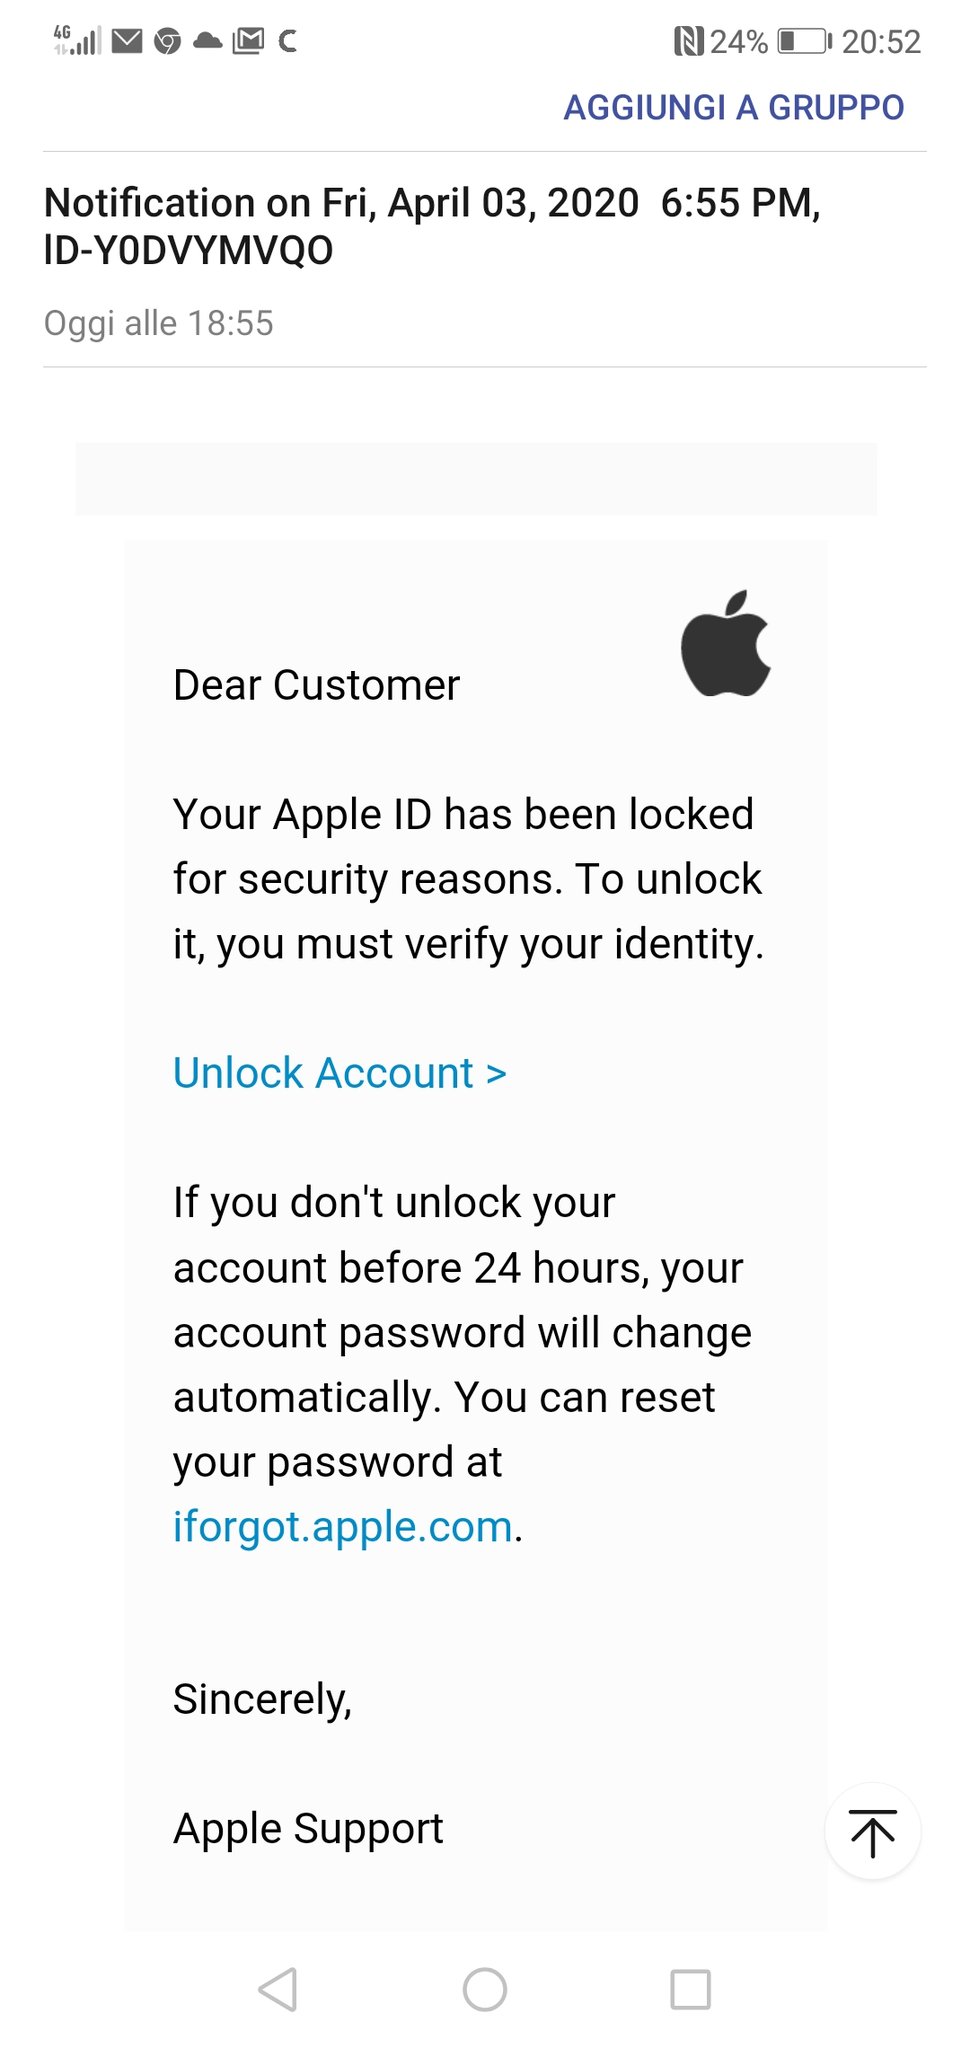 Apple 24 hour chat support